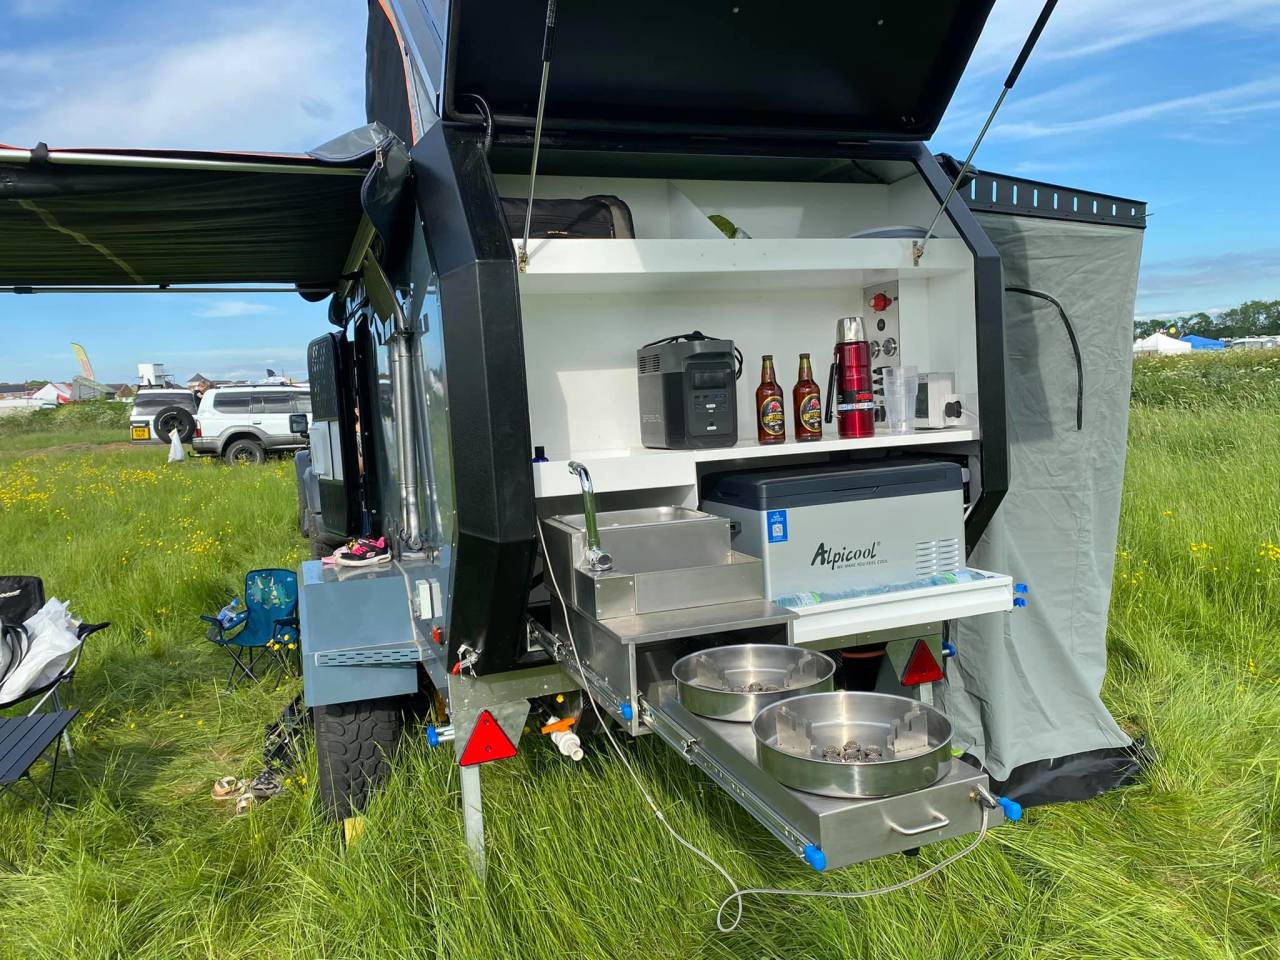 In place of the common transverse kitchen common in squaredrop trailers, Valkari adds a combination of full-width counter and slide-out equipment